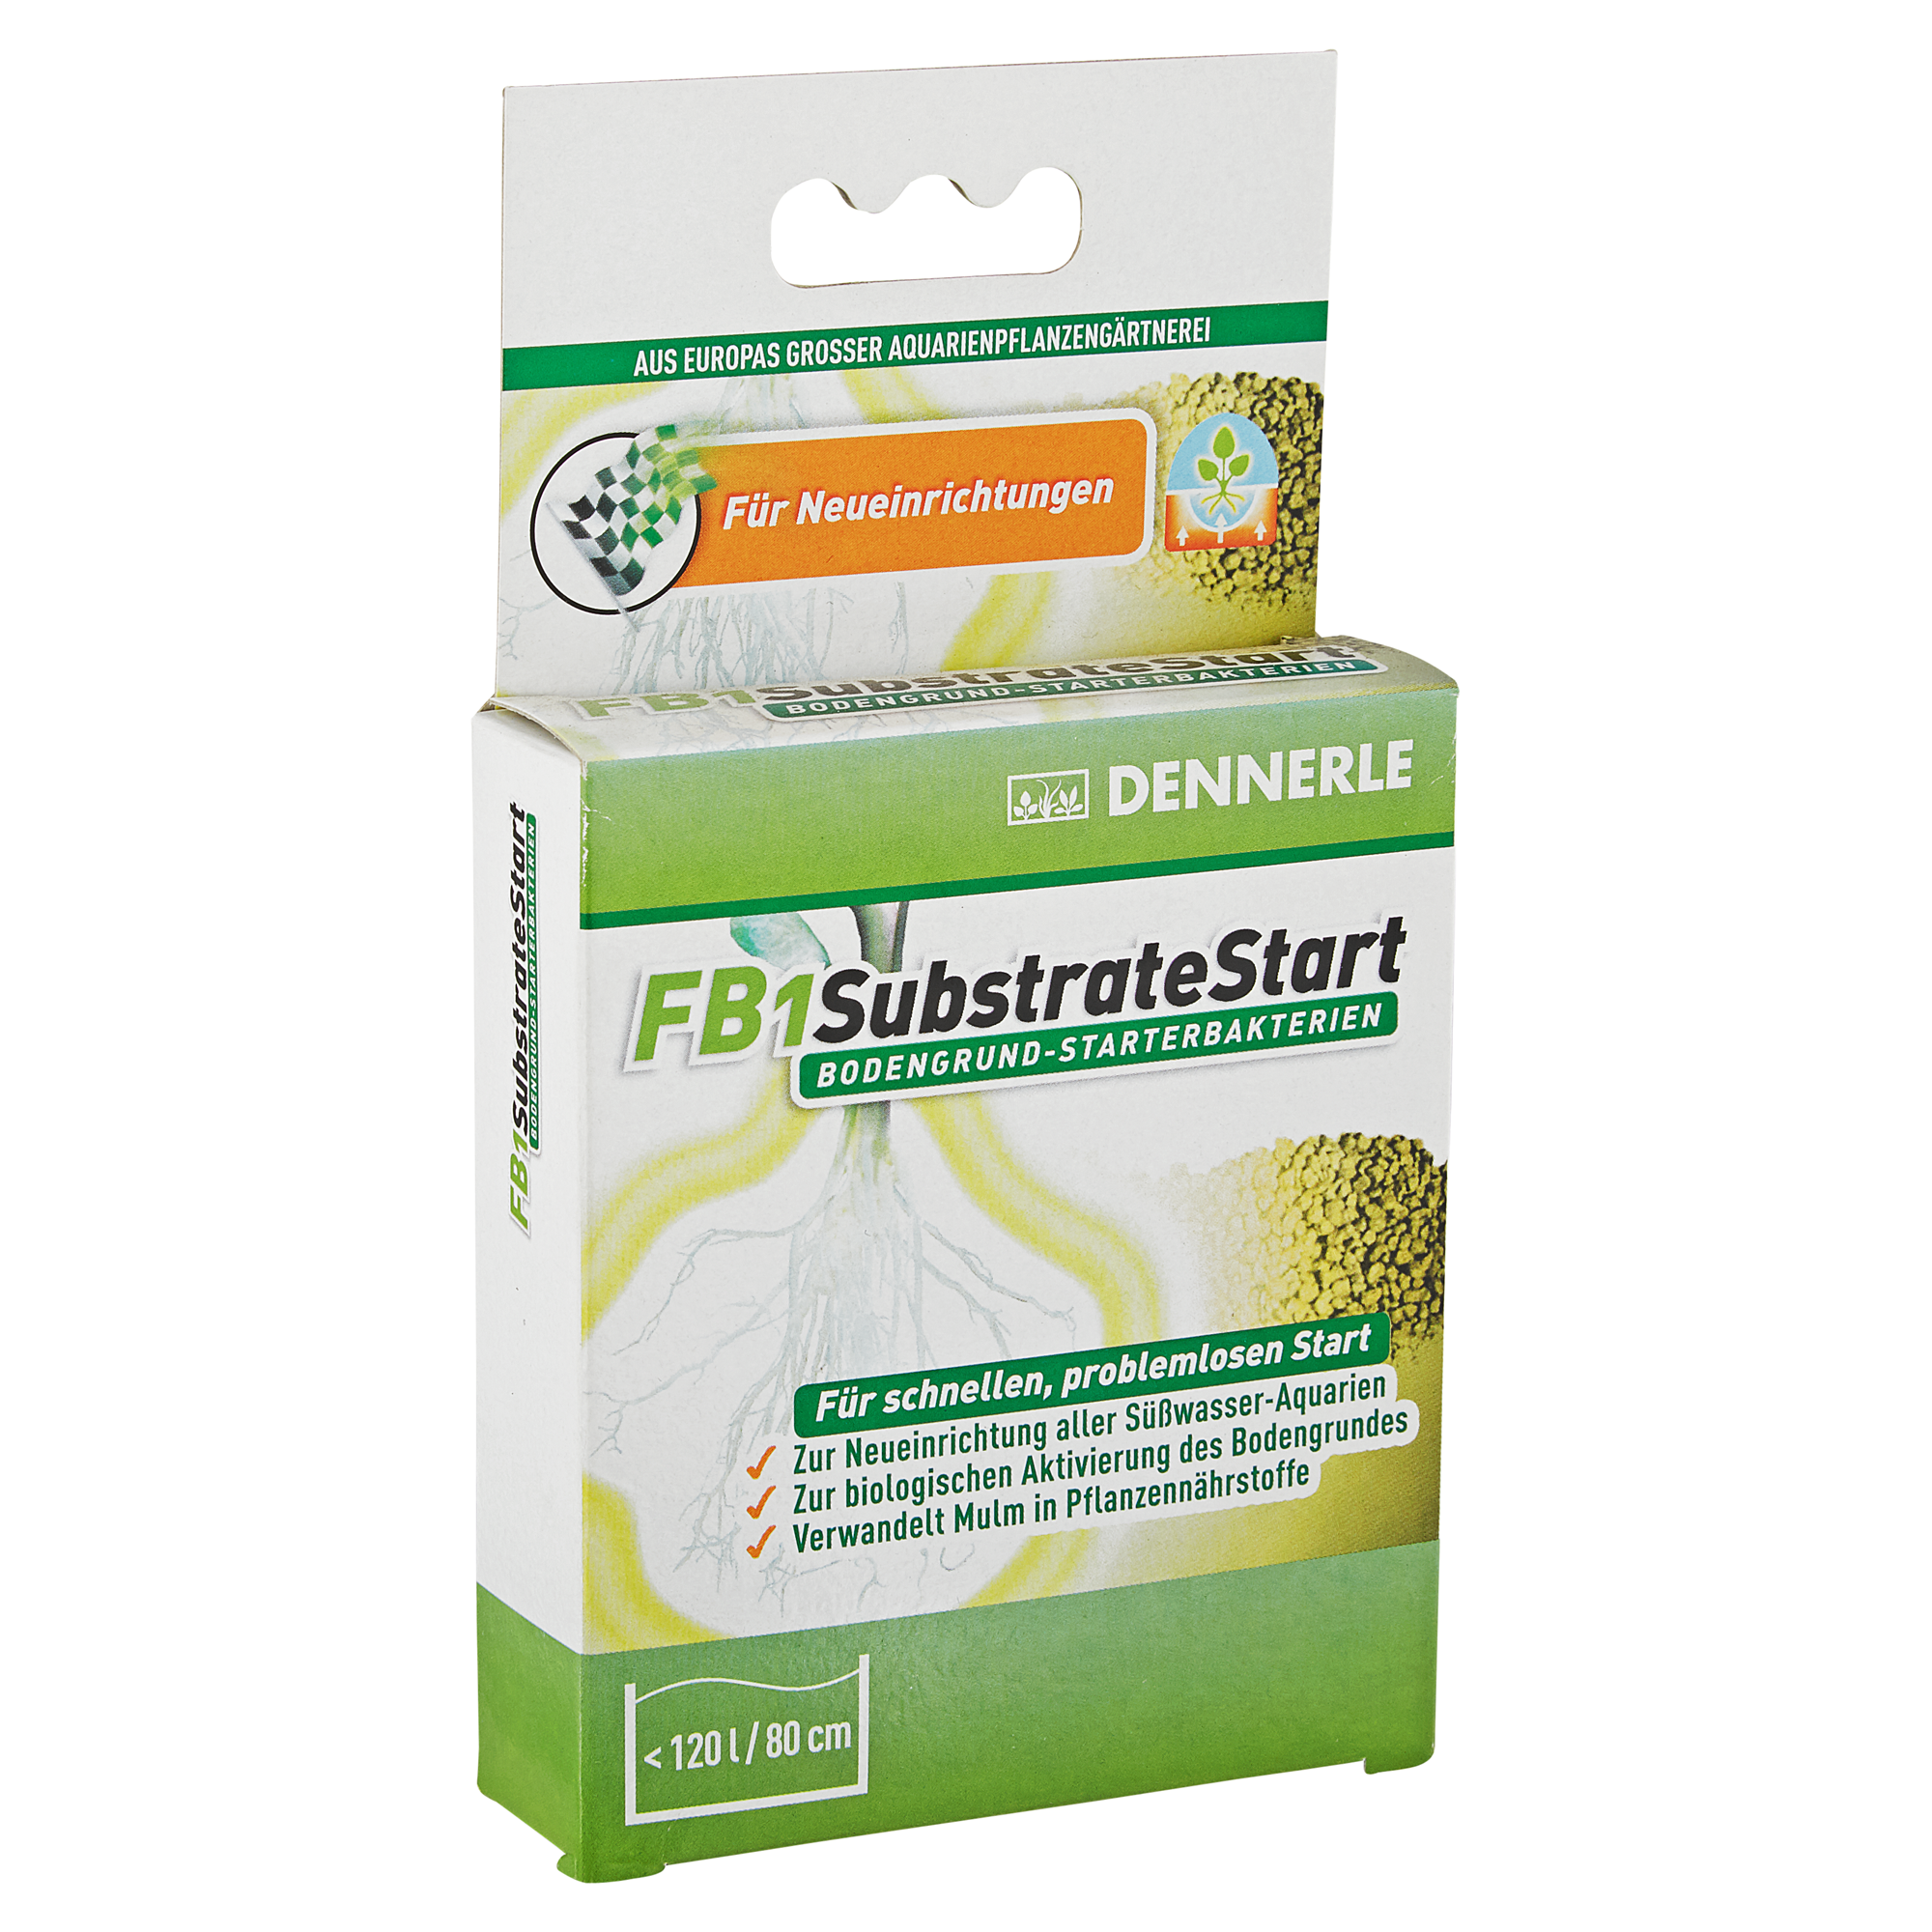 Bodengrund-Starterbakterien 'FB1 Substrate Start' 50 g + product picture